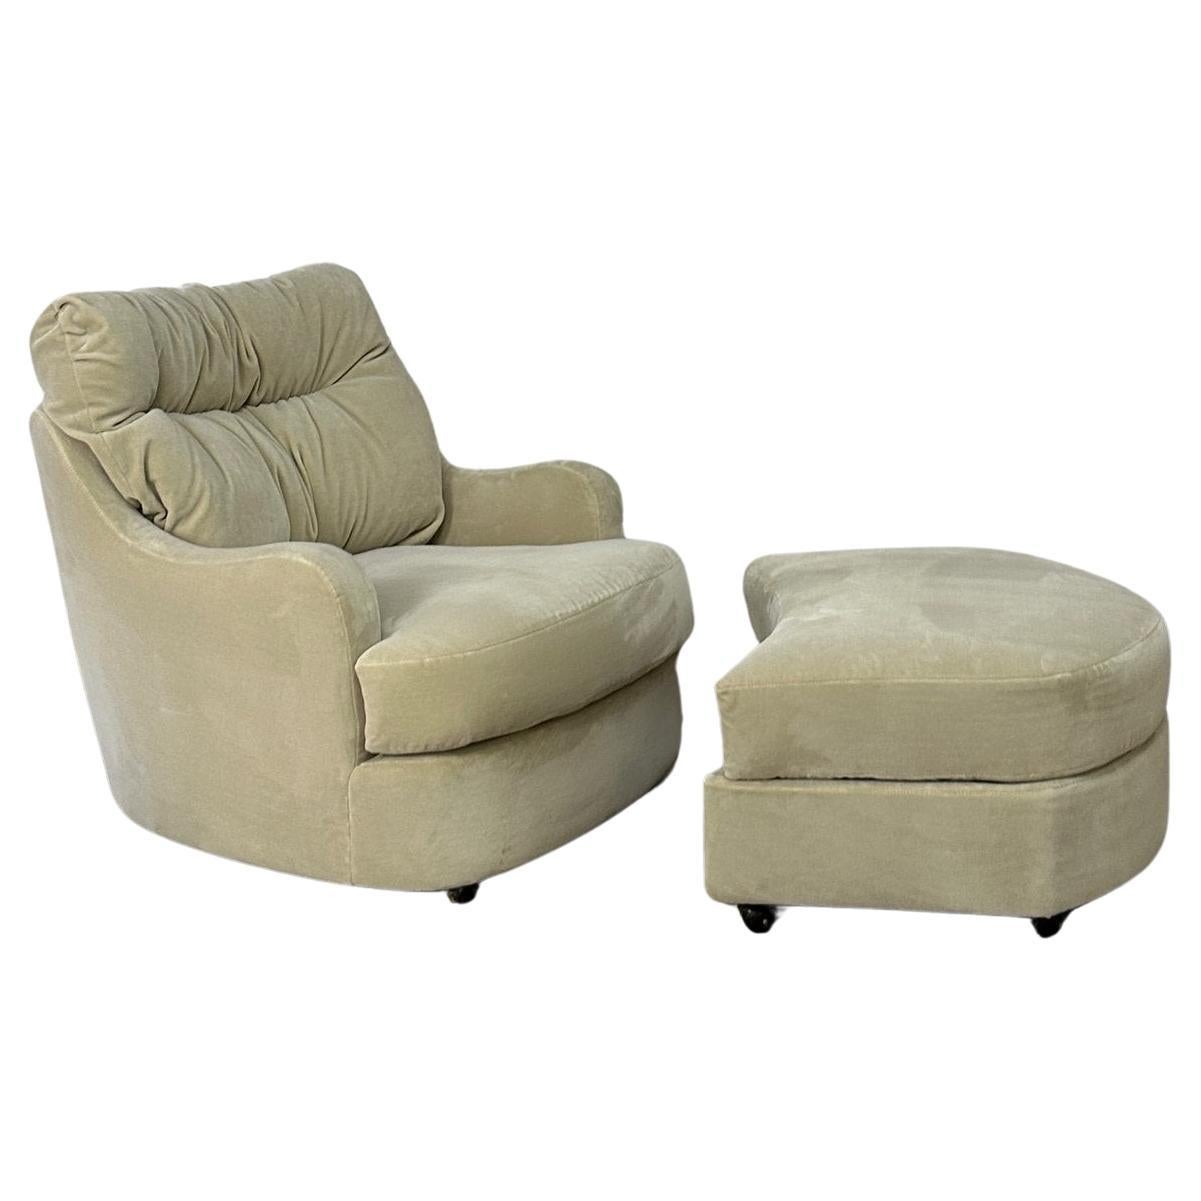 Oversized Lounge chair and ottoman For Sale